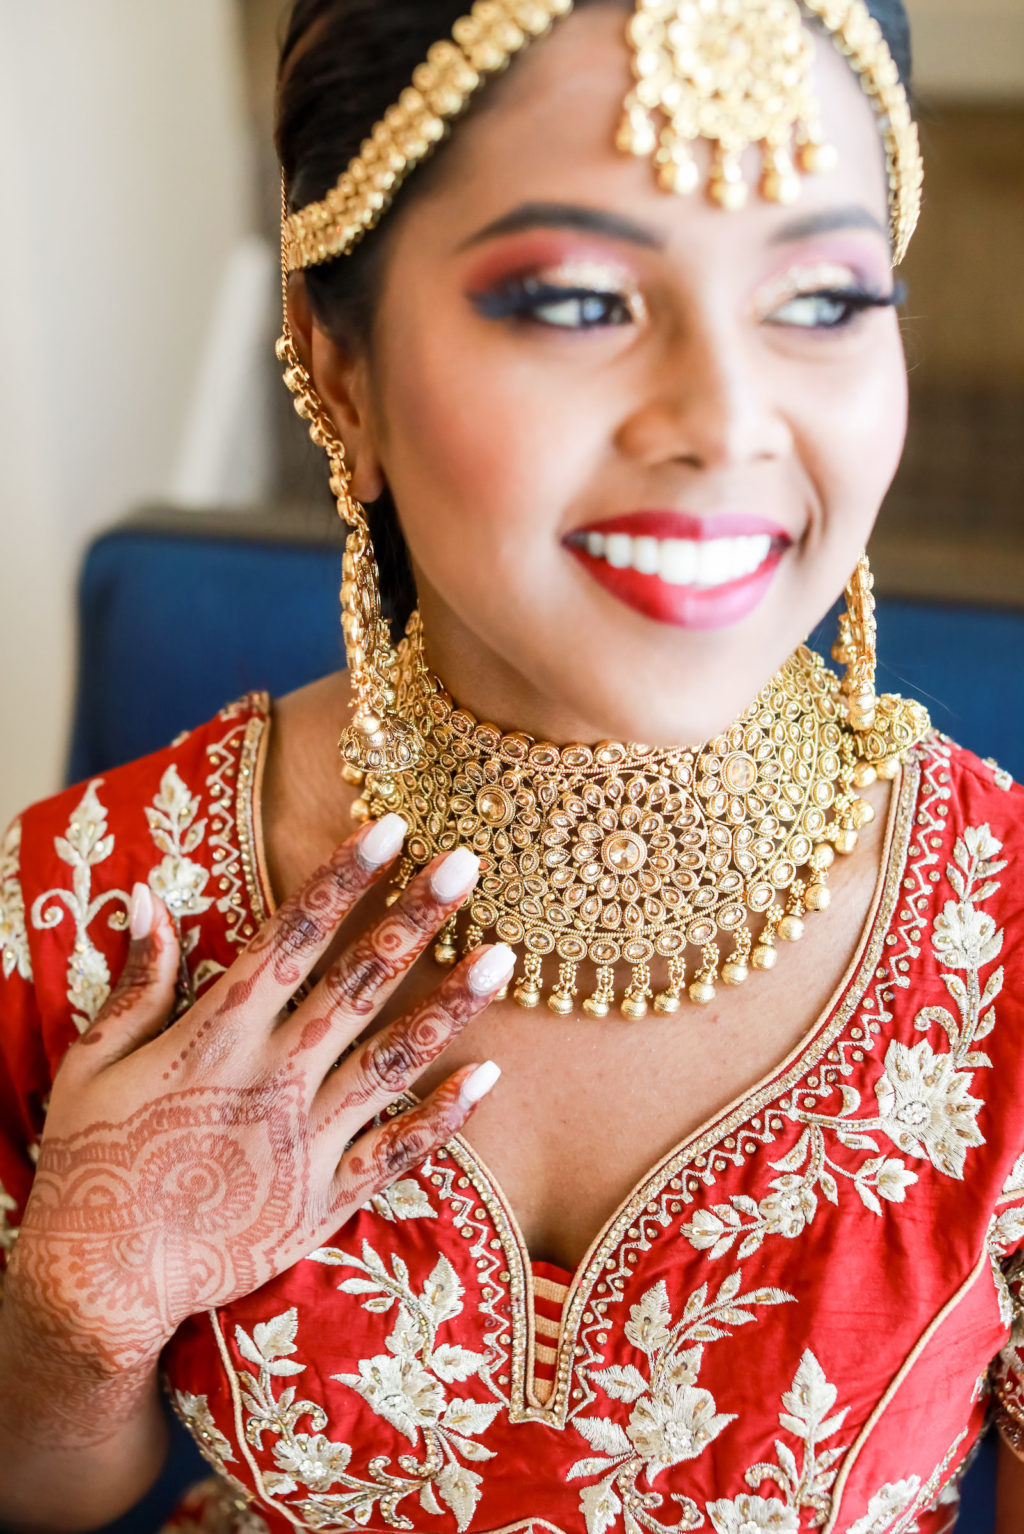 Hindu Indian Bride in Red and Gold Lengha Dress, Henna Tattoo Hands, Elaborate Gold Choker, Headpiece and Dangle Earrings | Tampa Bay Wedding Photographer Lifelong Photography Studios